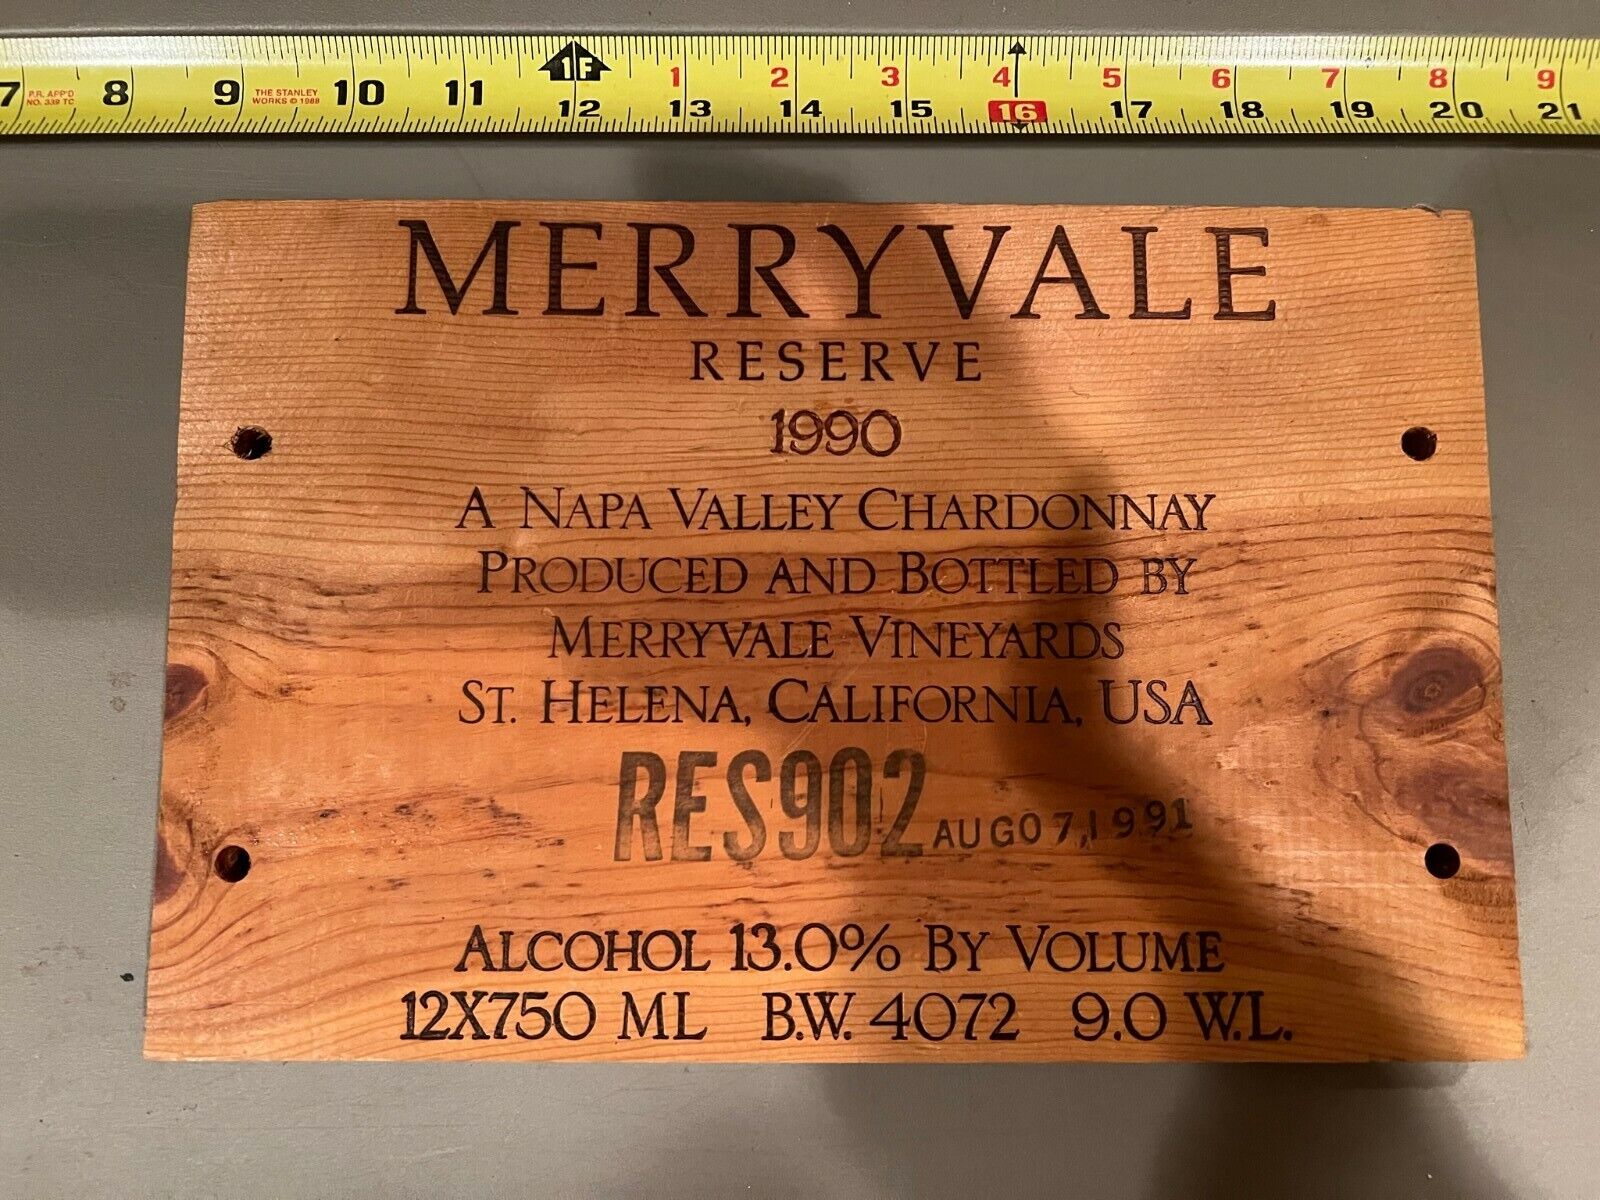 Branded Wine Wooden Case Ends - Merryvale Reserve 1990 Chardonnay Napa Valley